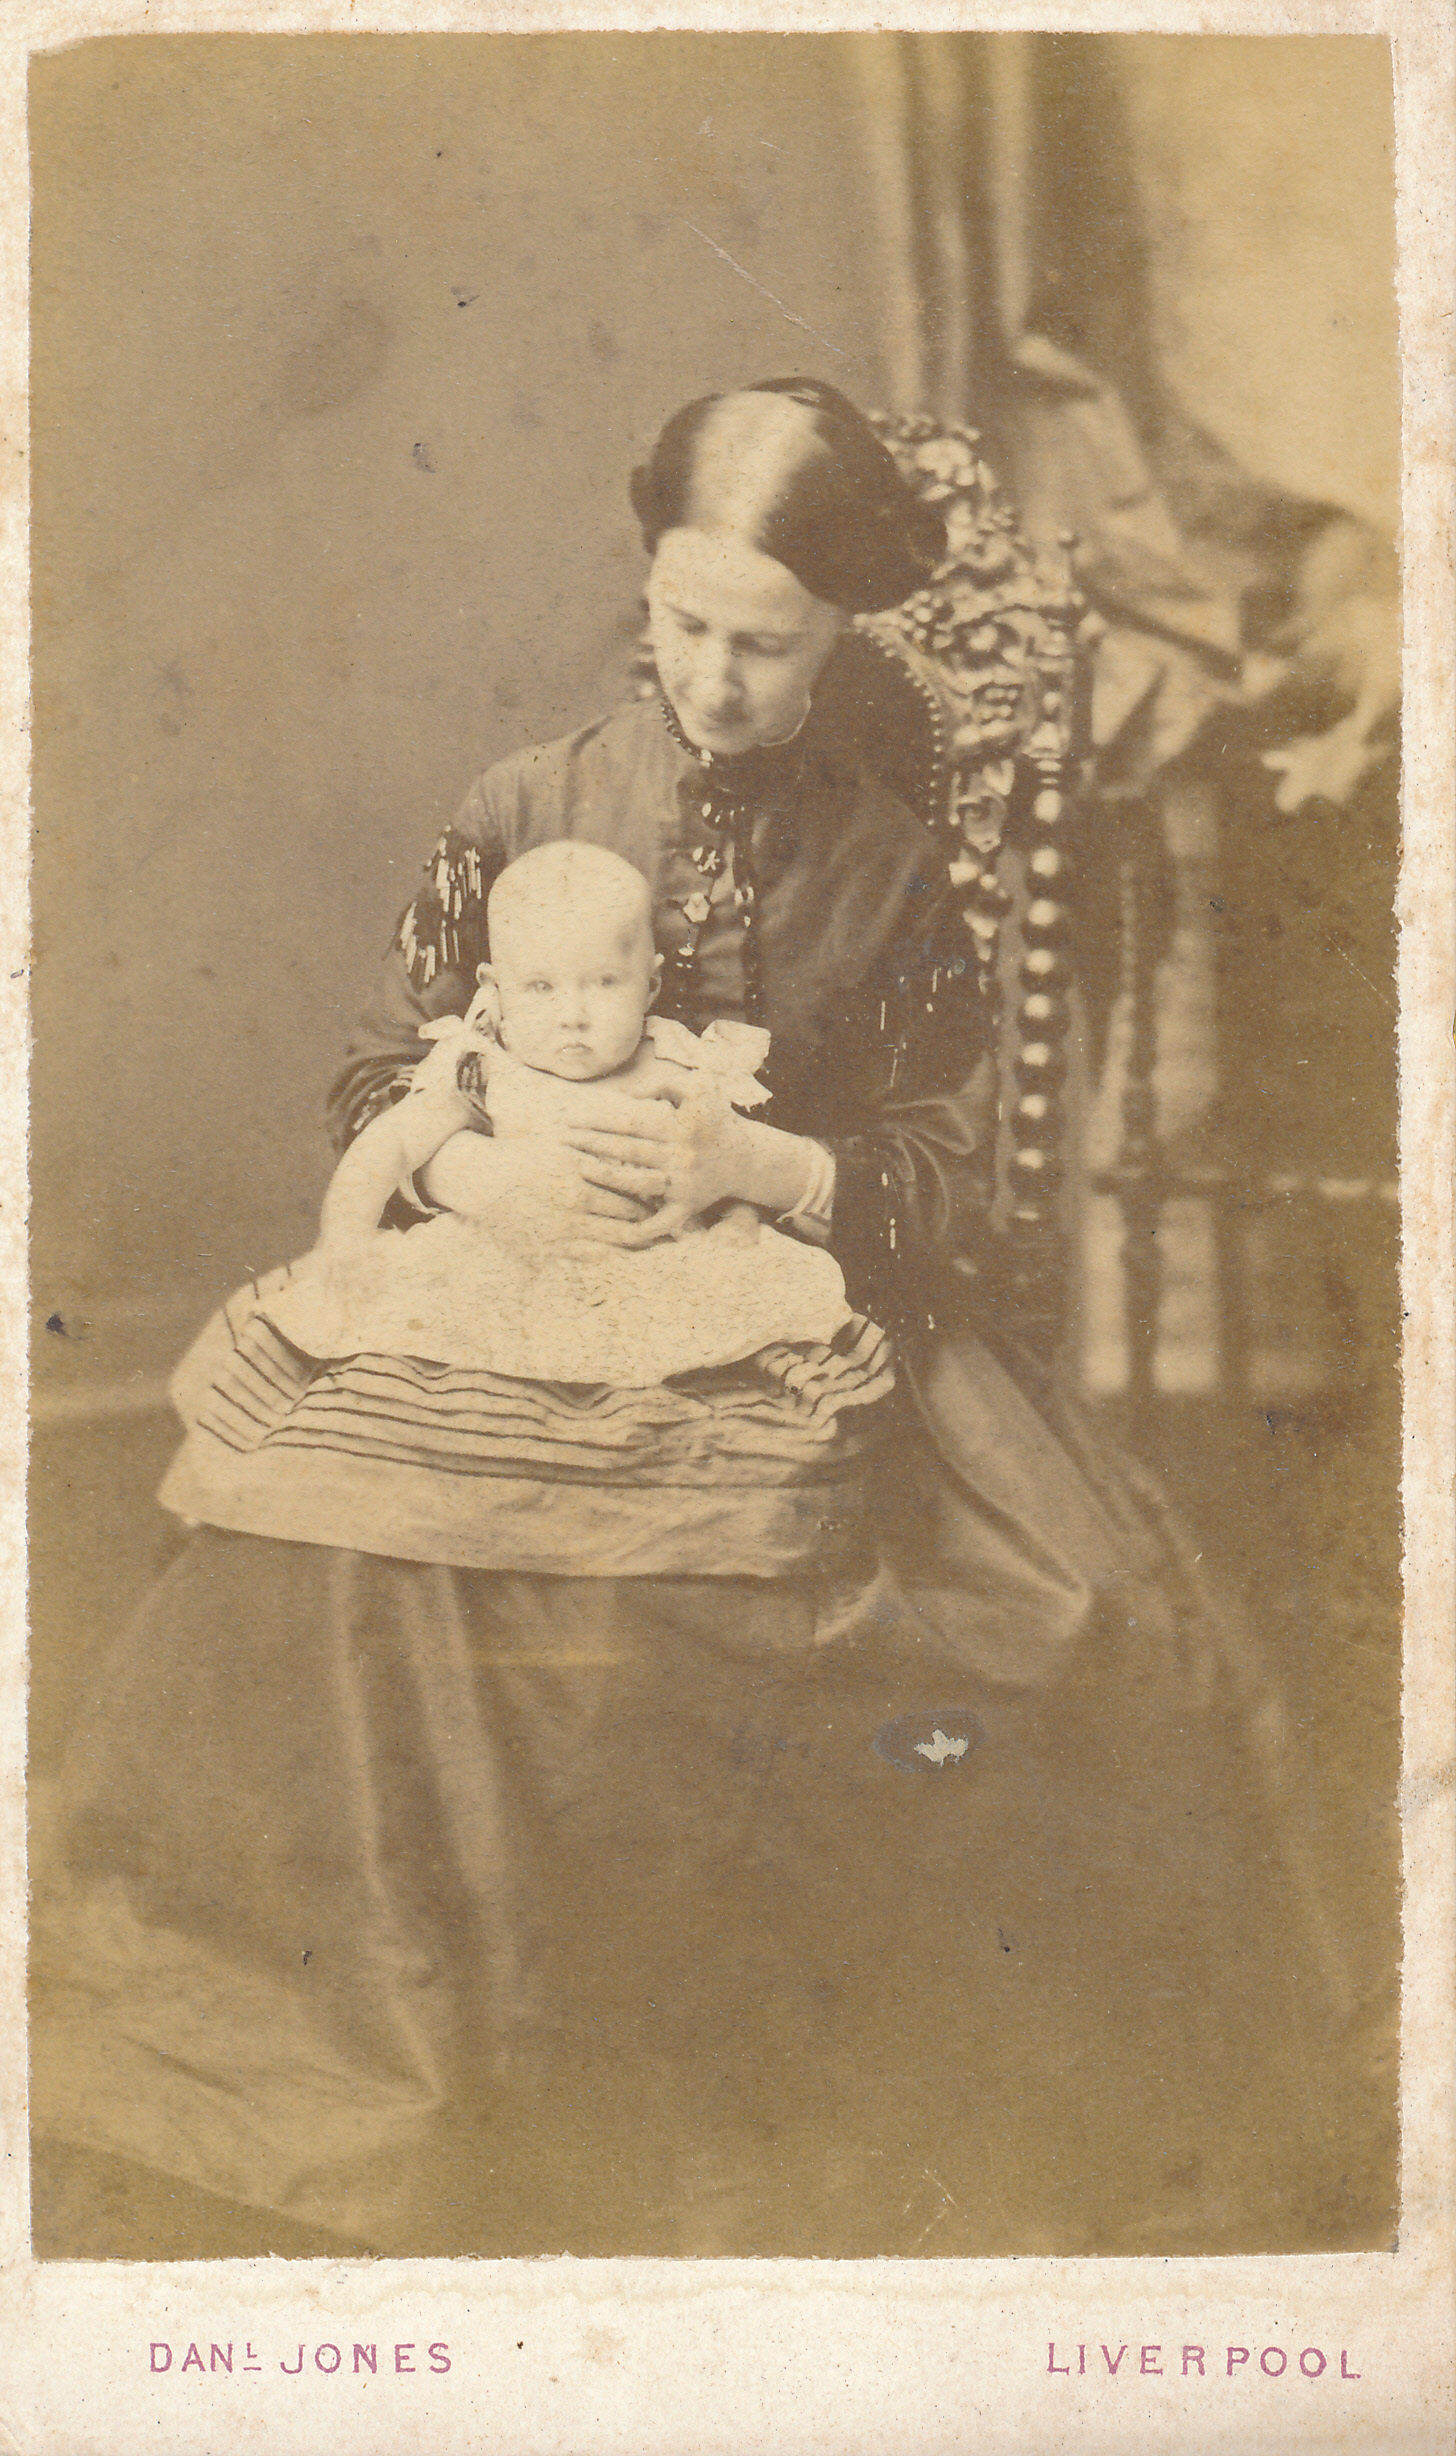 an old fashion picture shows a woman with a baby